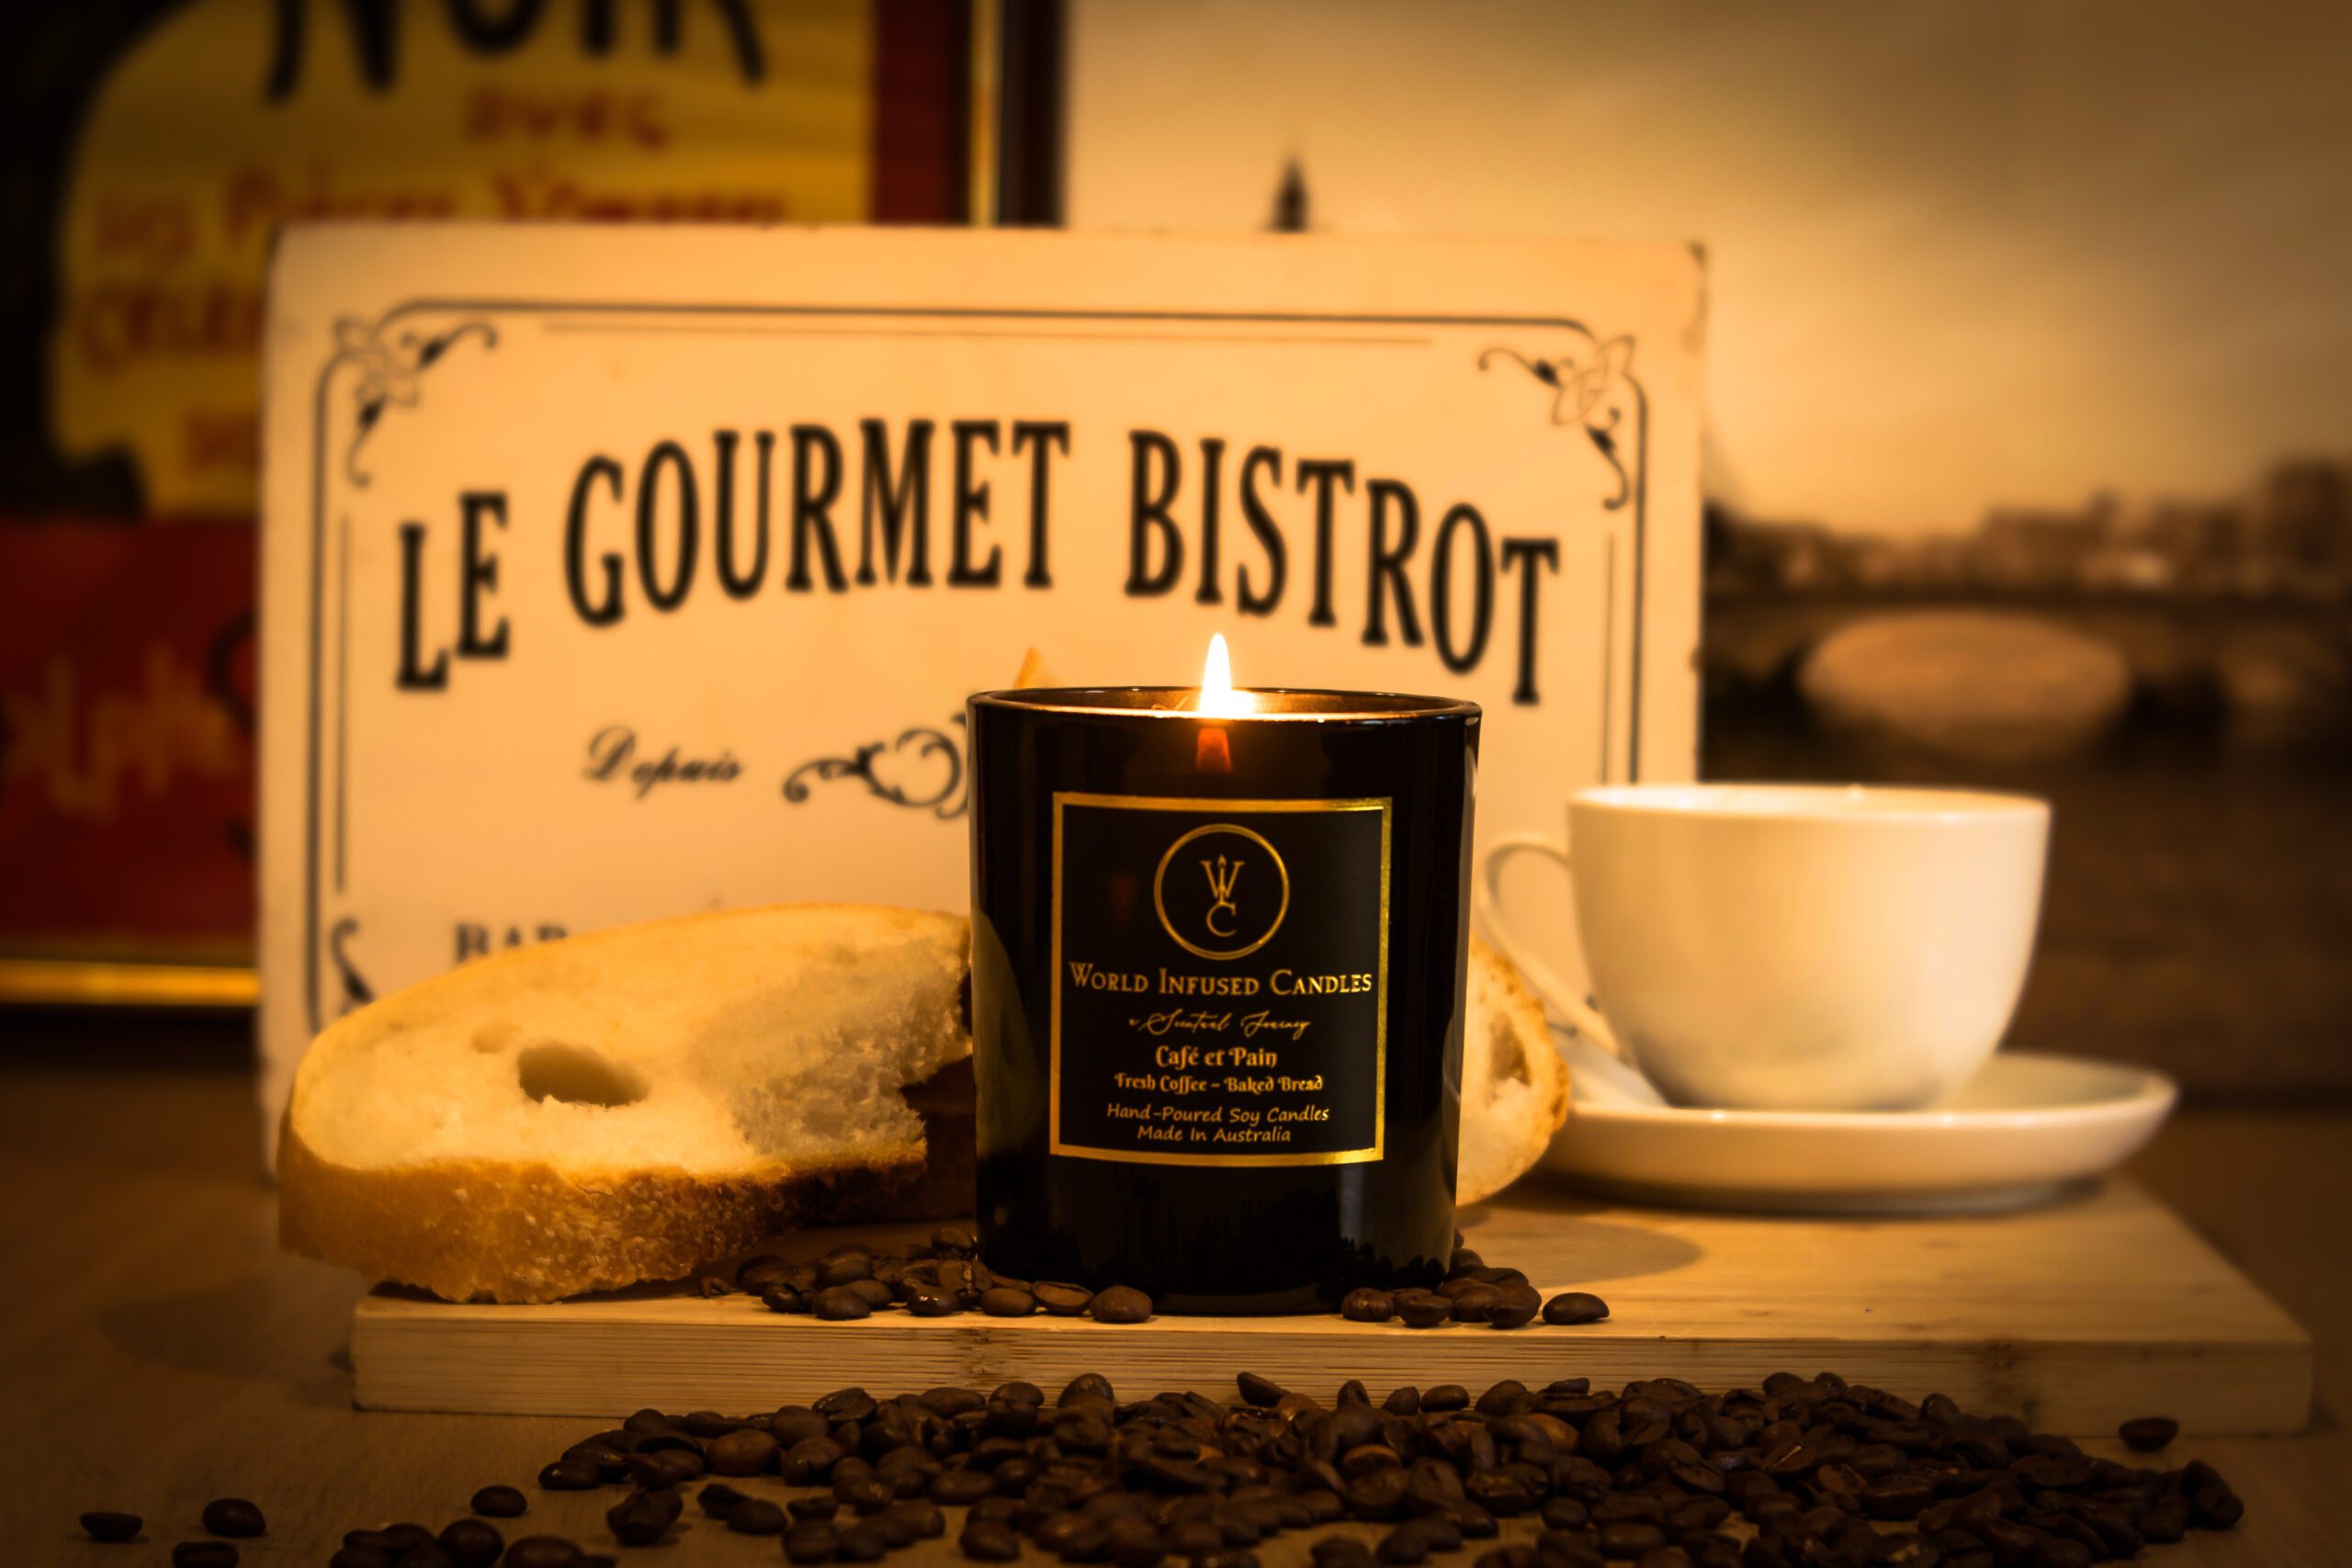 Lit Example of World Infused Candles Coffee Candle Café et Pain